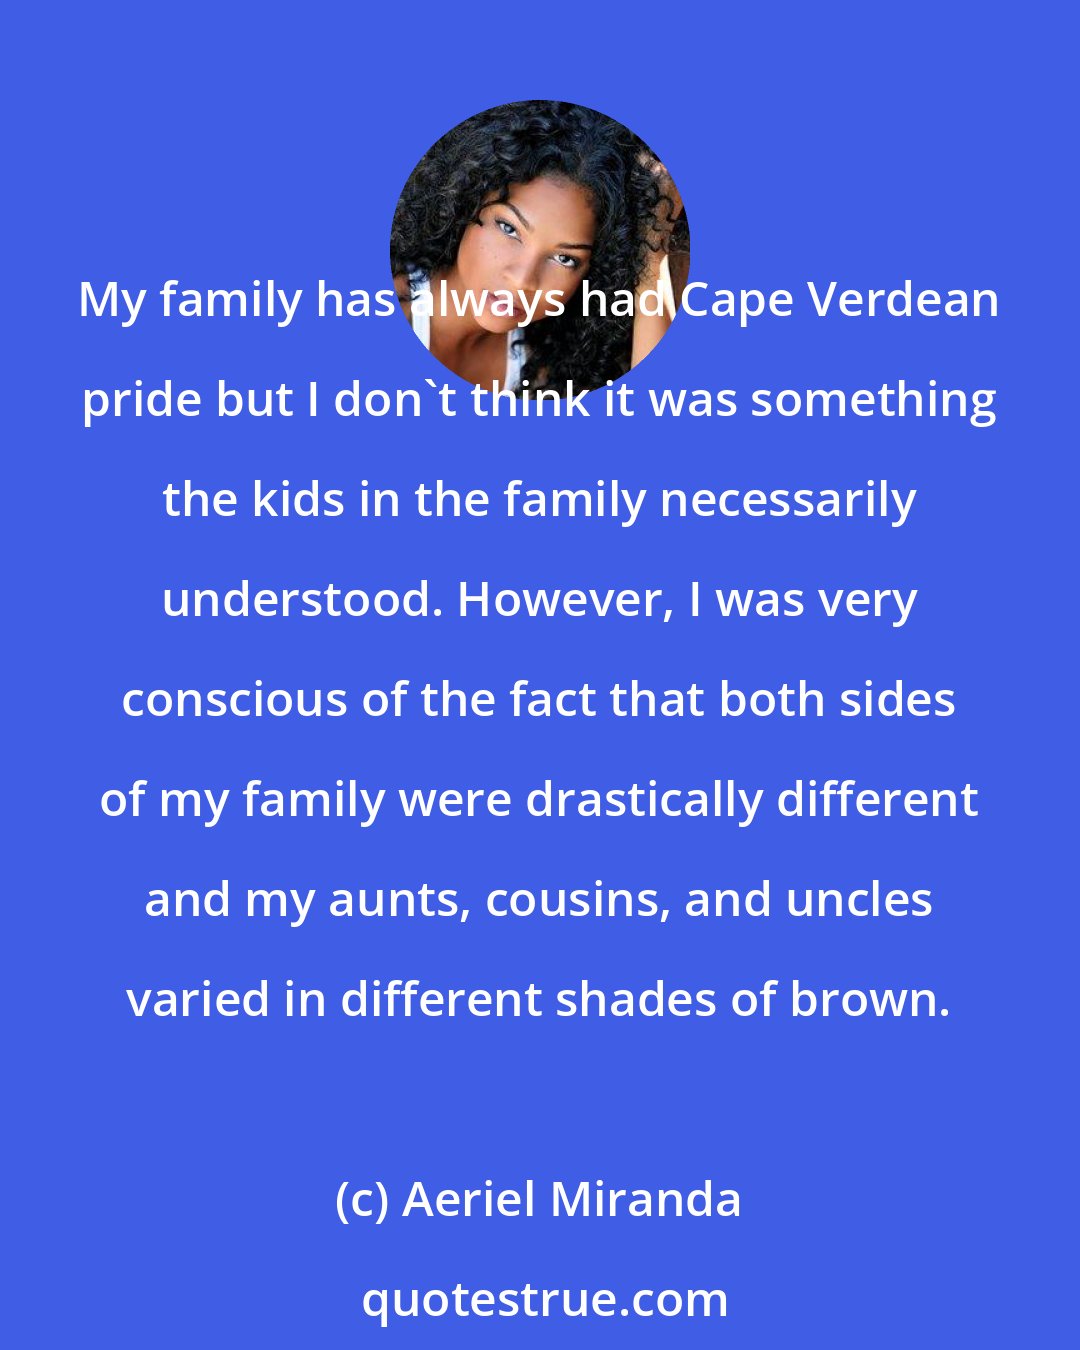 Aeriel Miranda: My family has always had Cape Verdean pride but I don't think it was something the kids in the family necessarily understood. However, I was very conscious of the fact that both sides of my family were drastically different and my aunts, cousins, and uncles varied in different shades of brown.